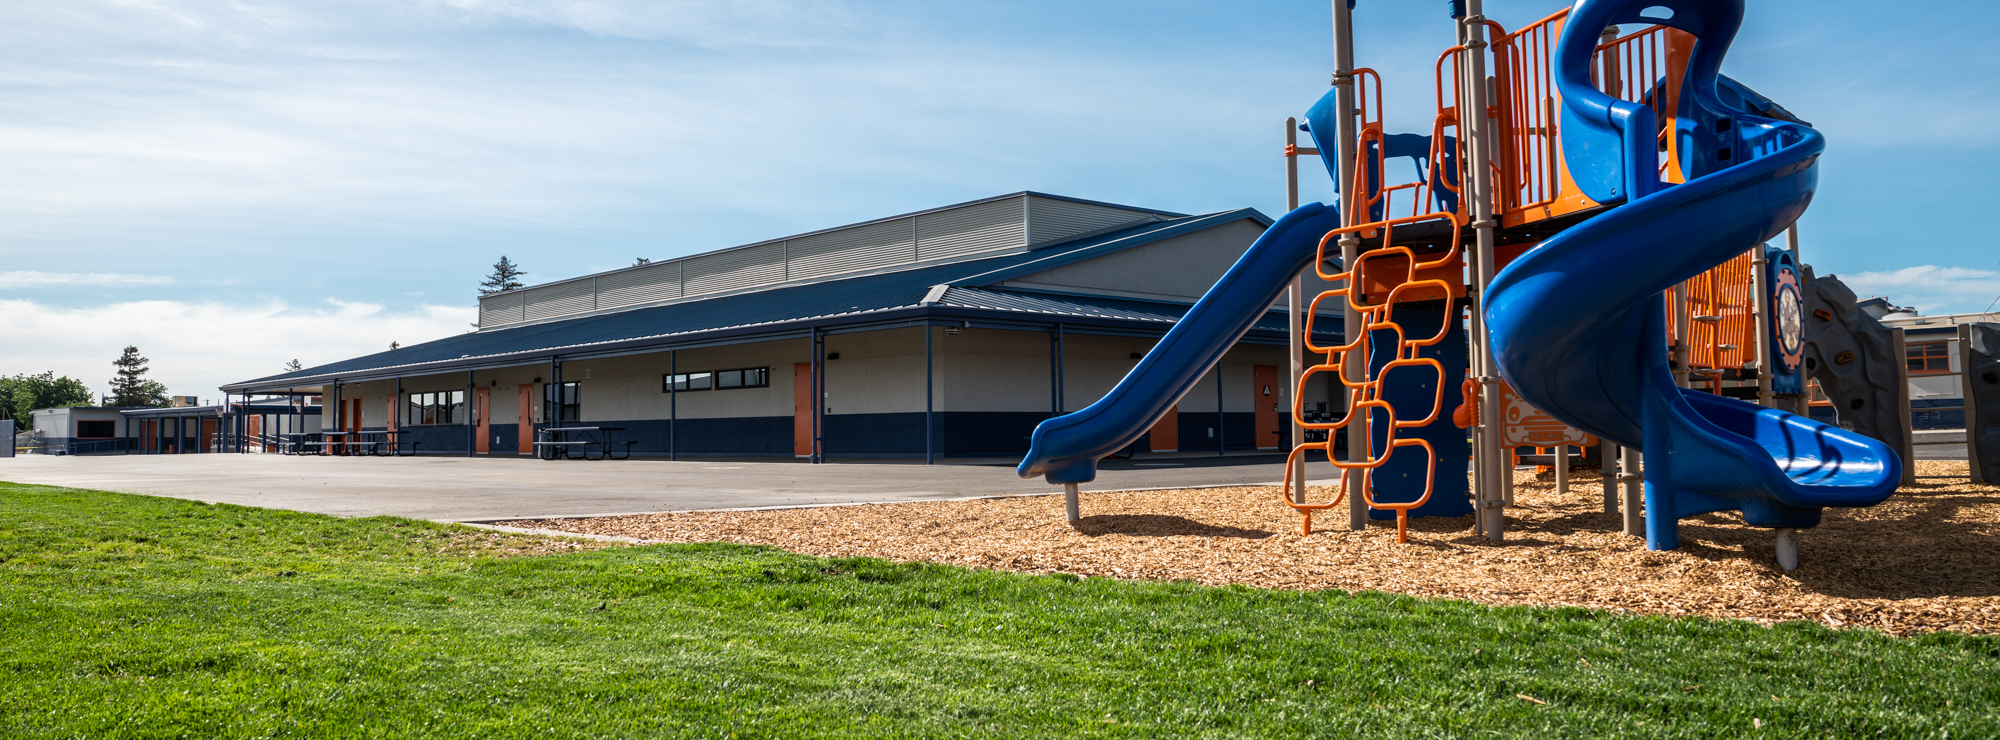 Bret Harte Playground and New Building